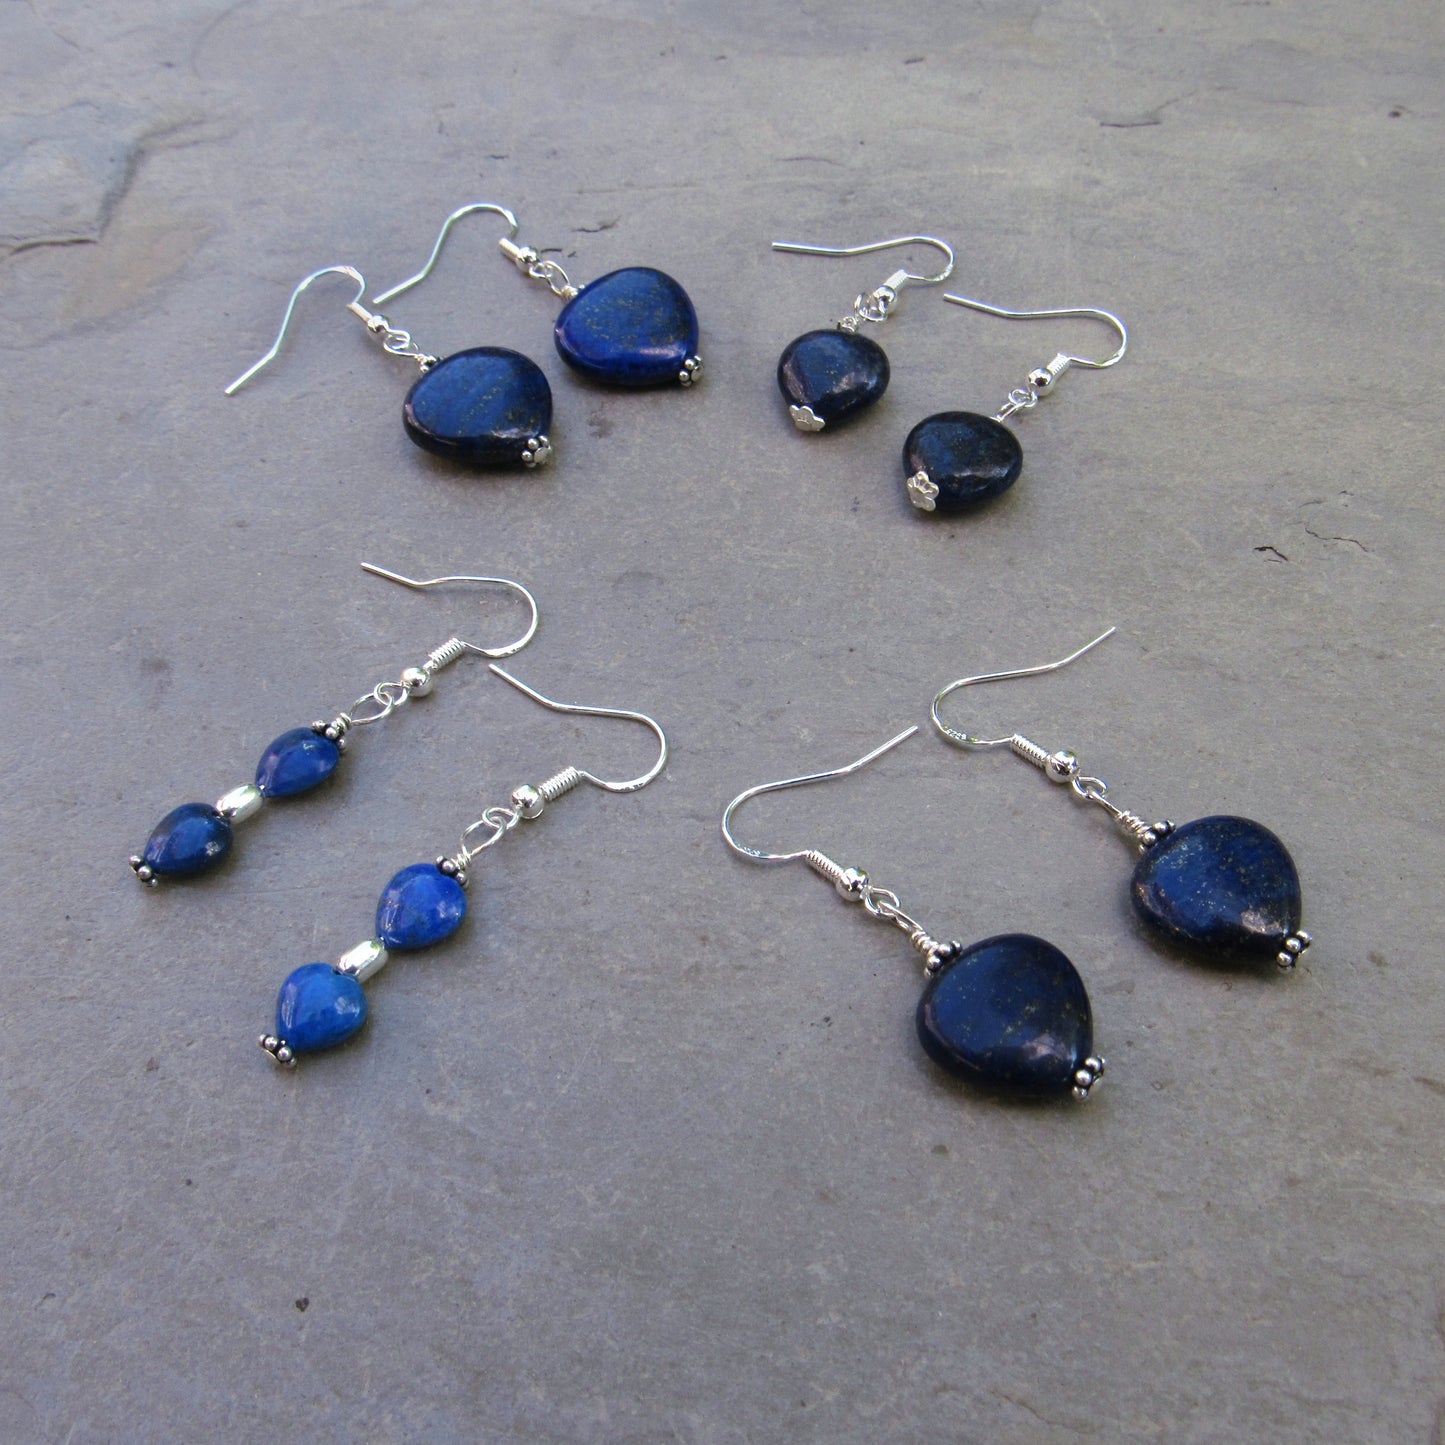 Lapis Lazuli Gemstone Hearts and Sterling Silver Earrings